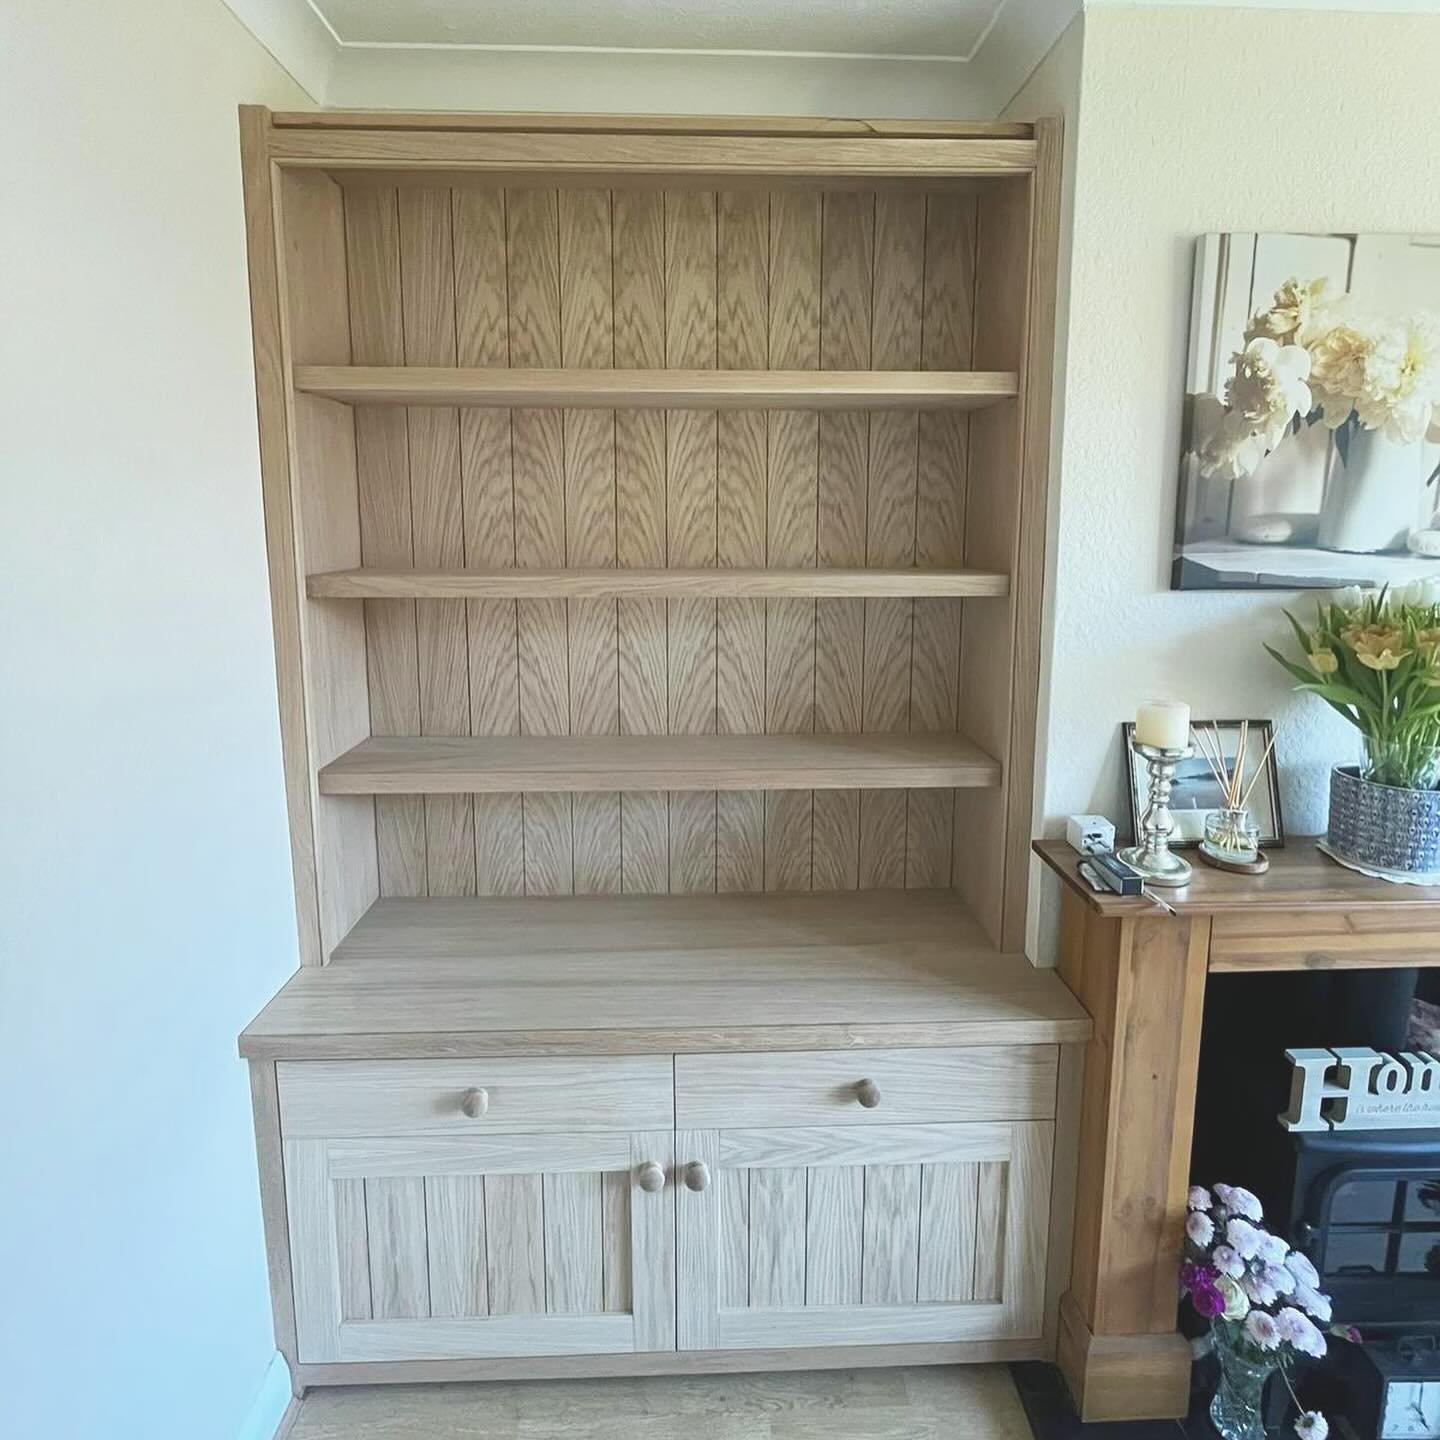 Our member @fitted.interiors.by.lime were approached by a new client in North London to design some alcove cabinets with shaker style doors with shelving above using oak materials. 🏡 This type of fitted furniture is always popular as you get to look